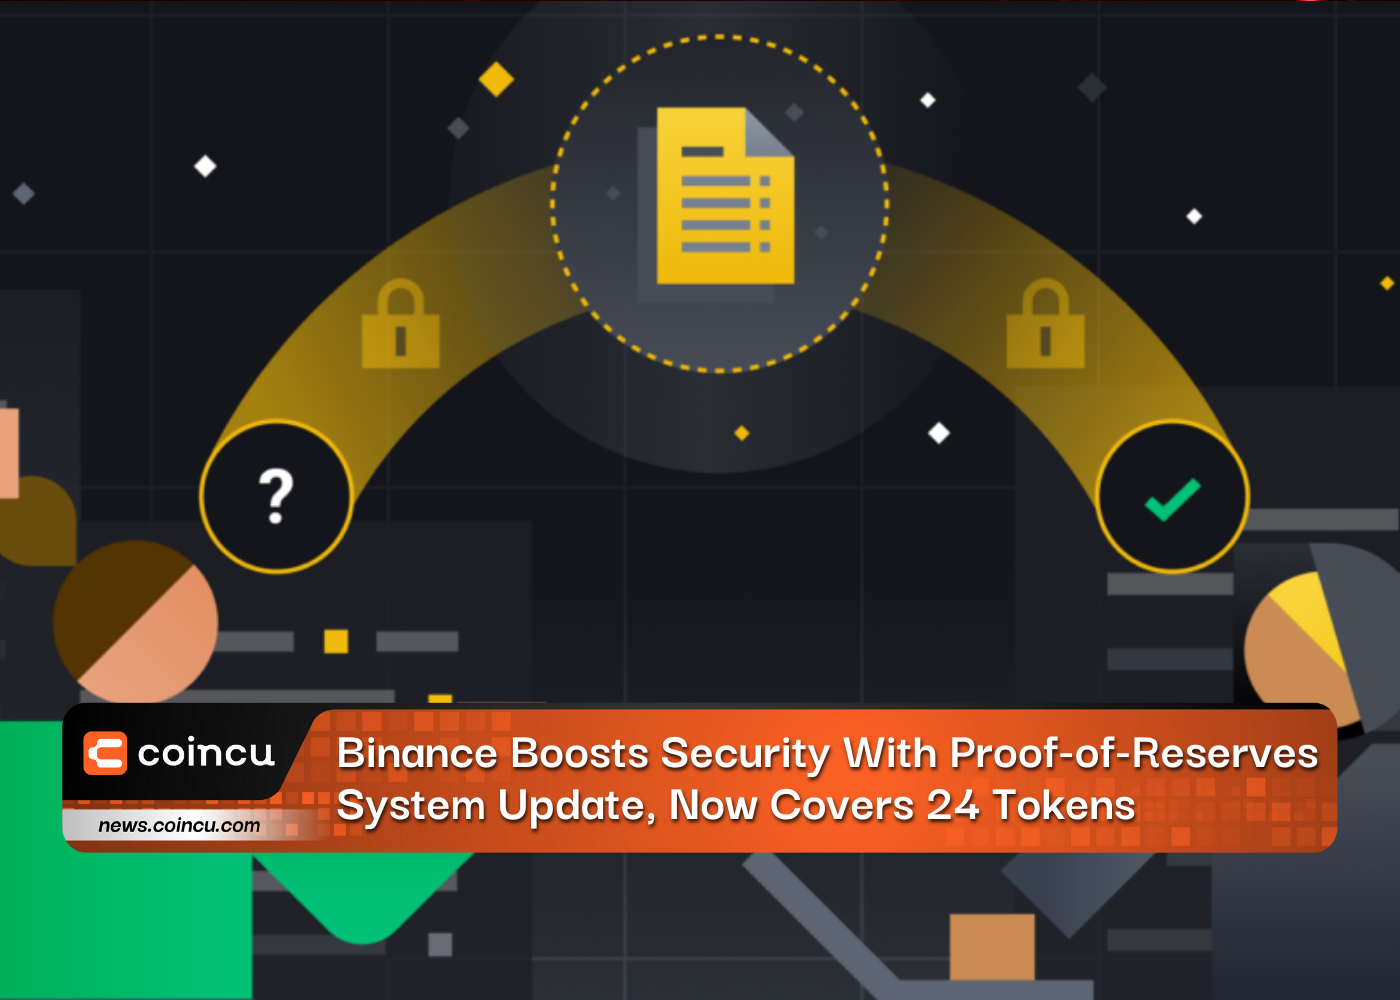 Binance Boosts Security With Proof-of-Reserves System Update, Now Covers 24 Tokens